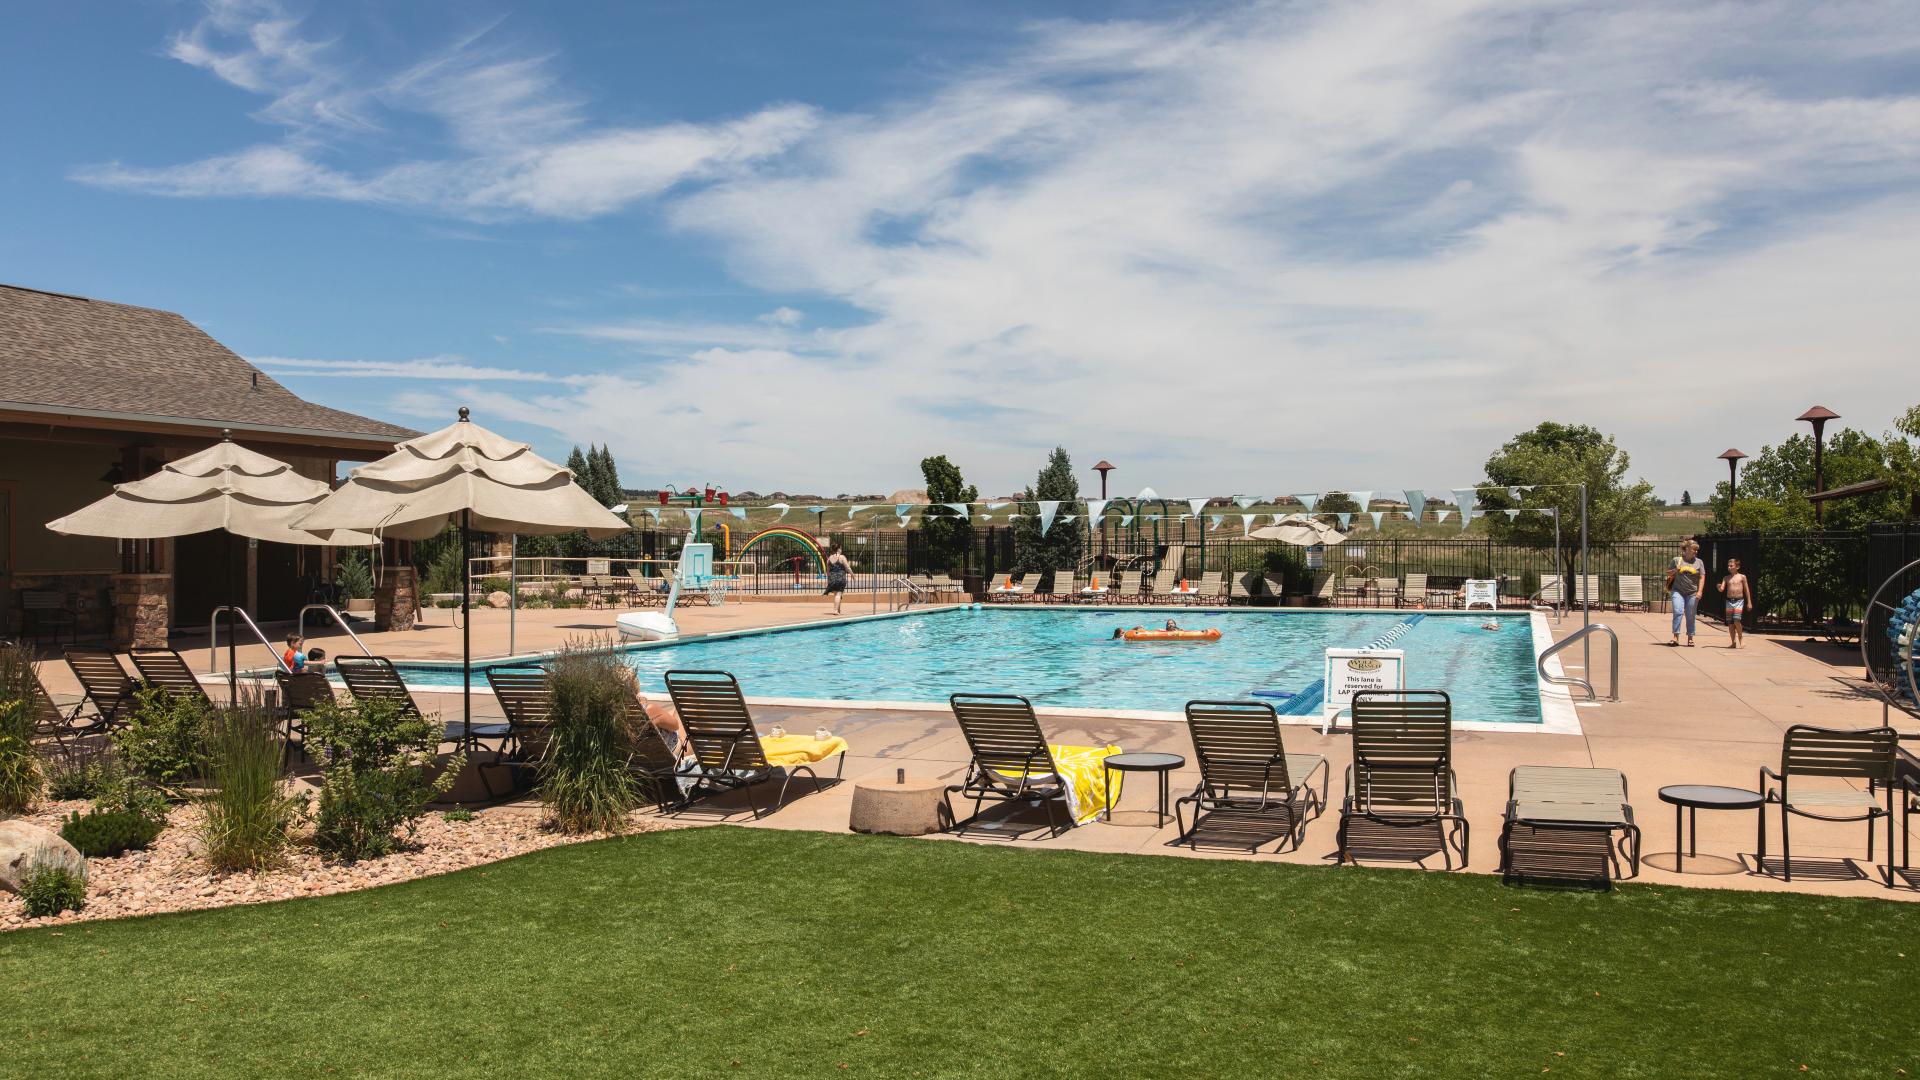 Spend time soaking in the sun or swimming in the Junior Olympic-sized community pool